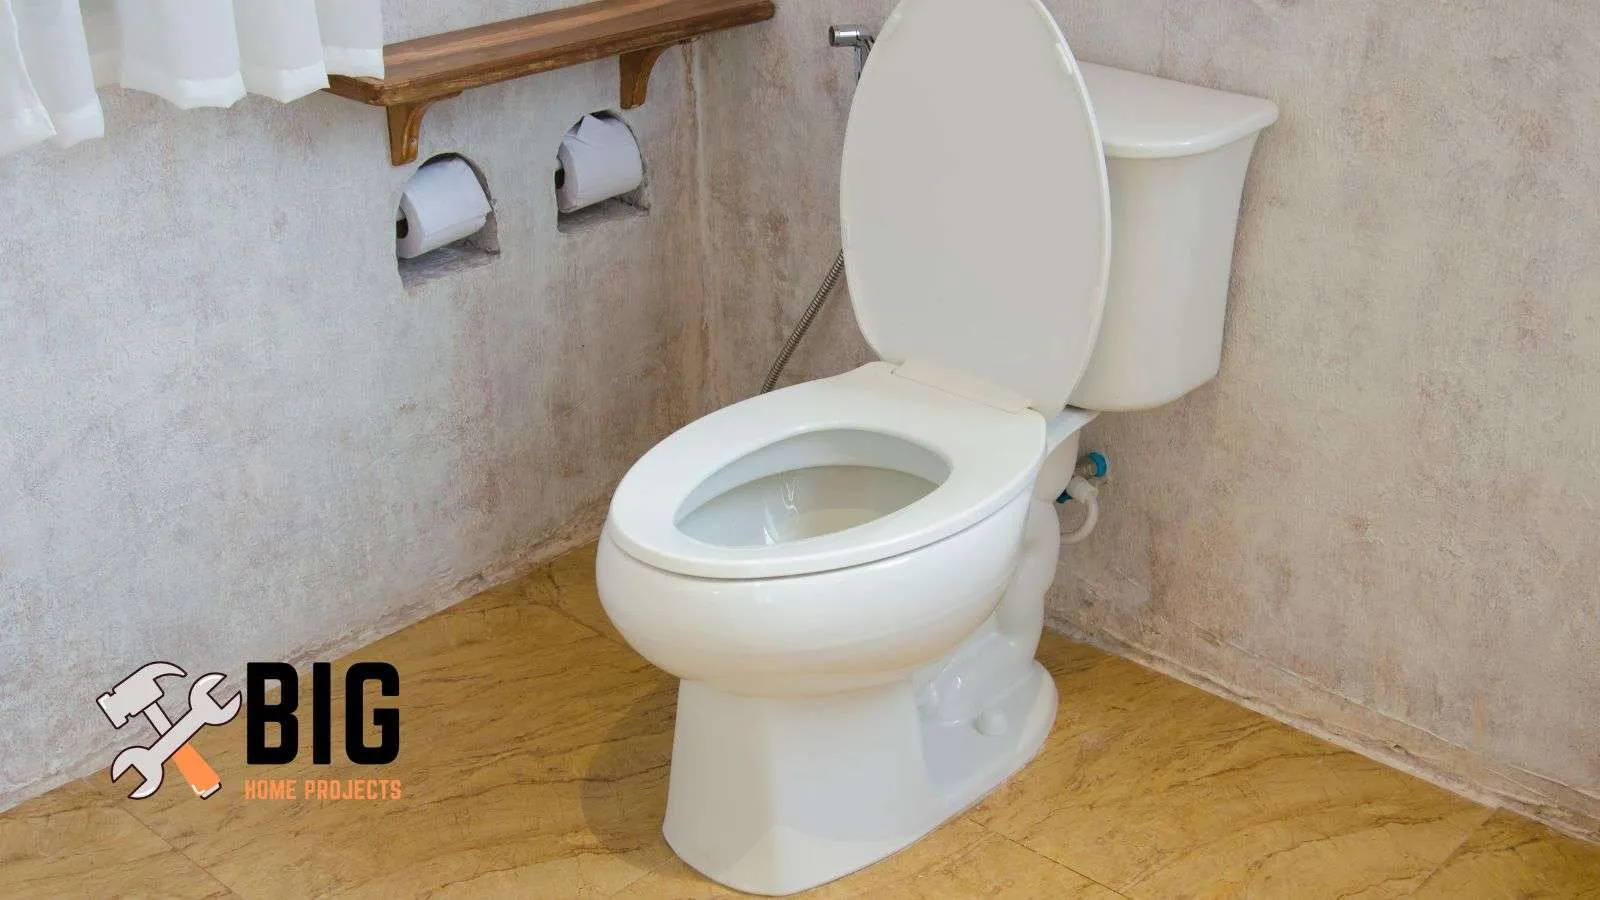 Toilet with lid open - bighomeprojects.com